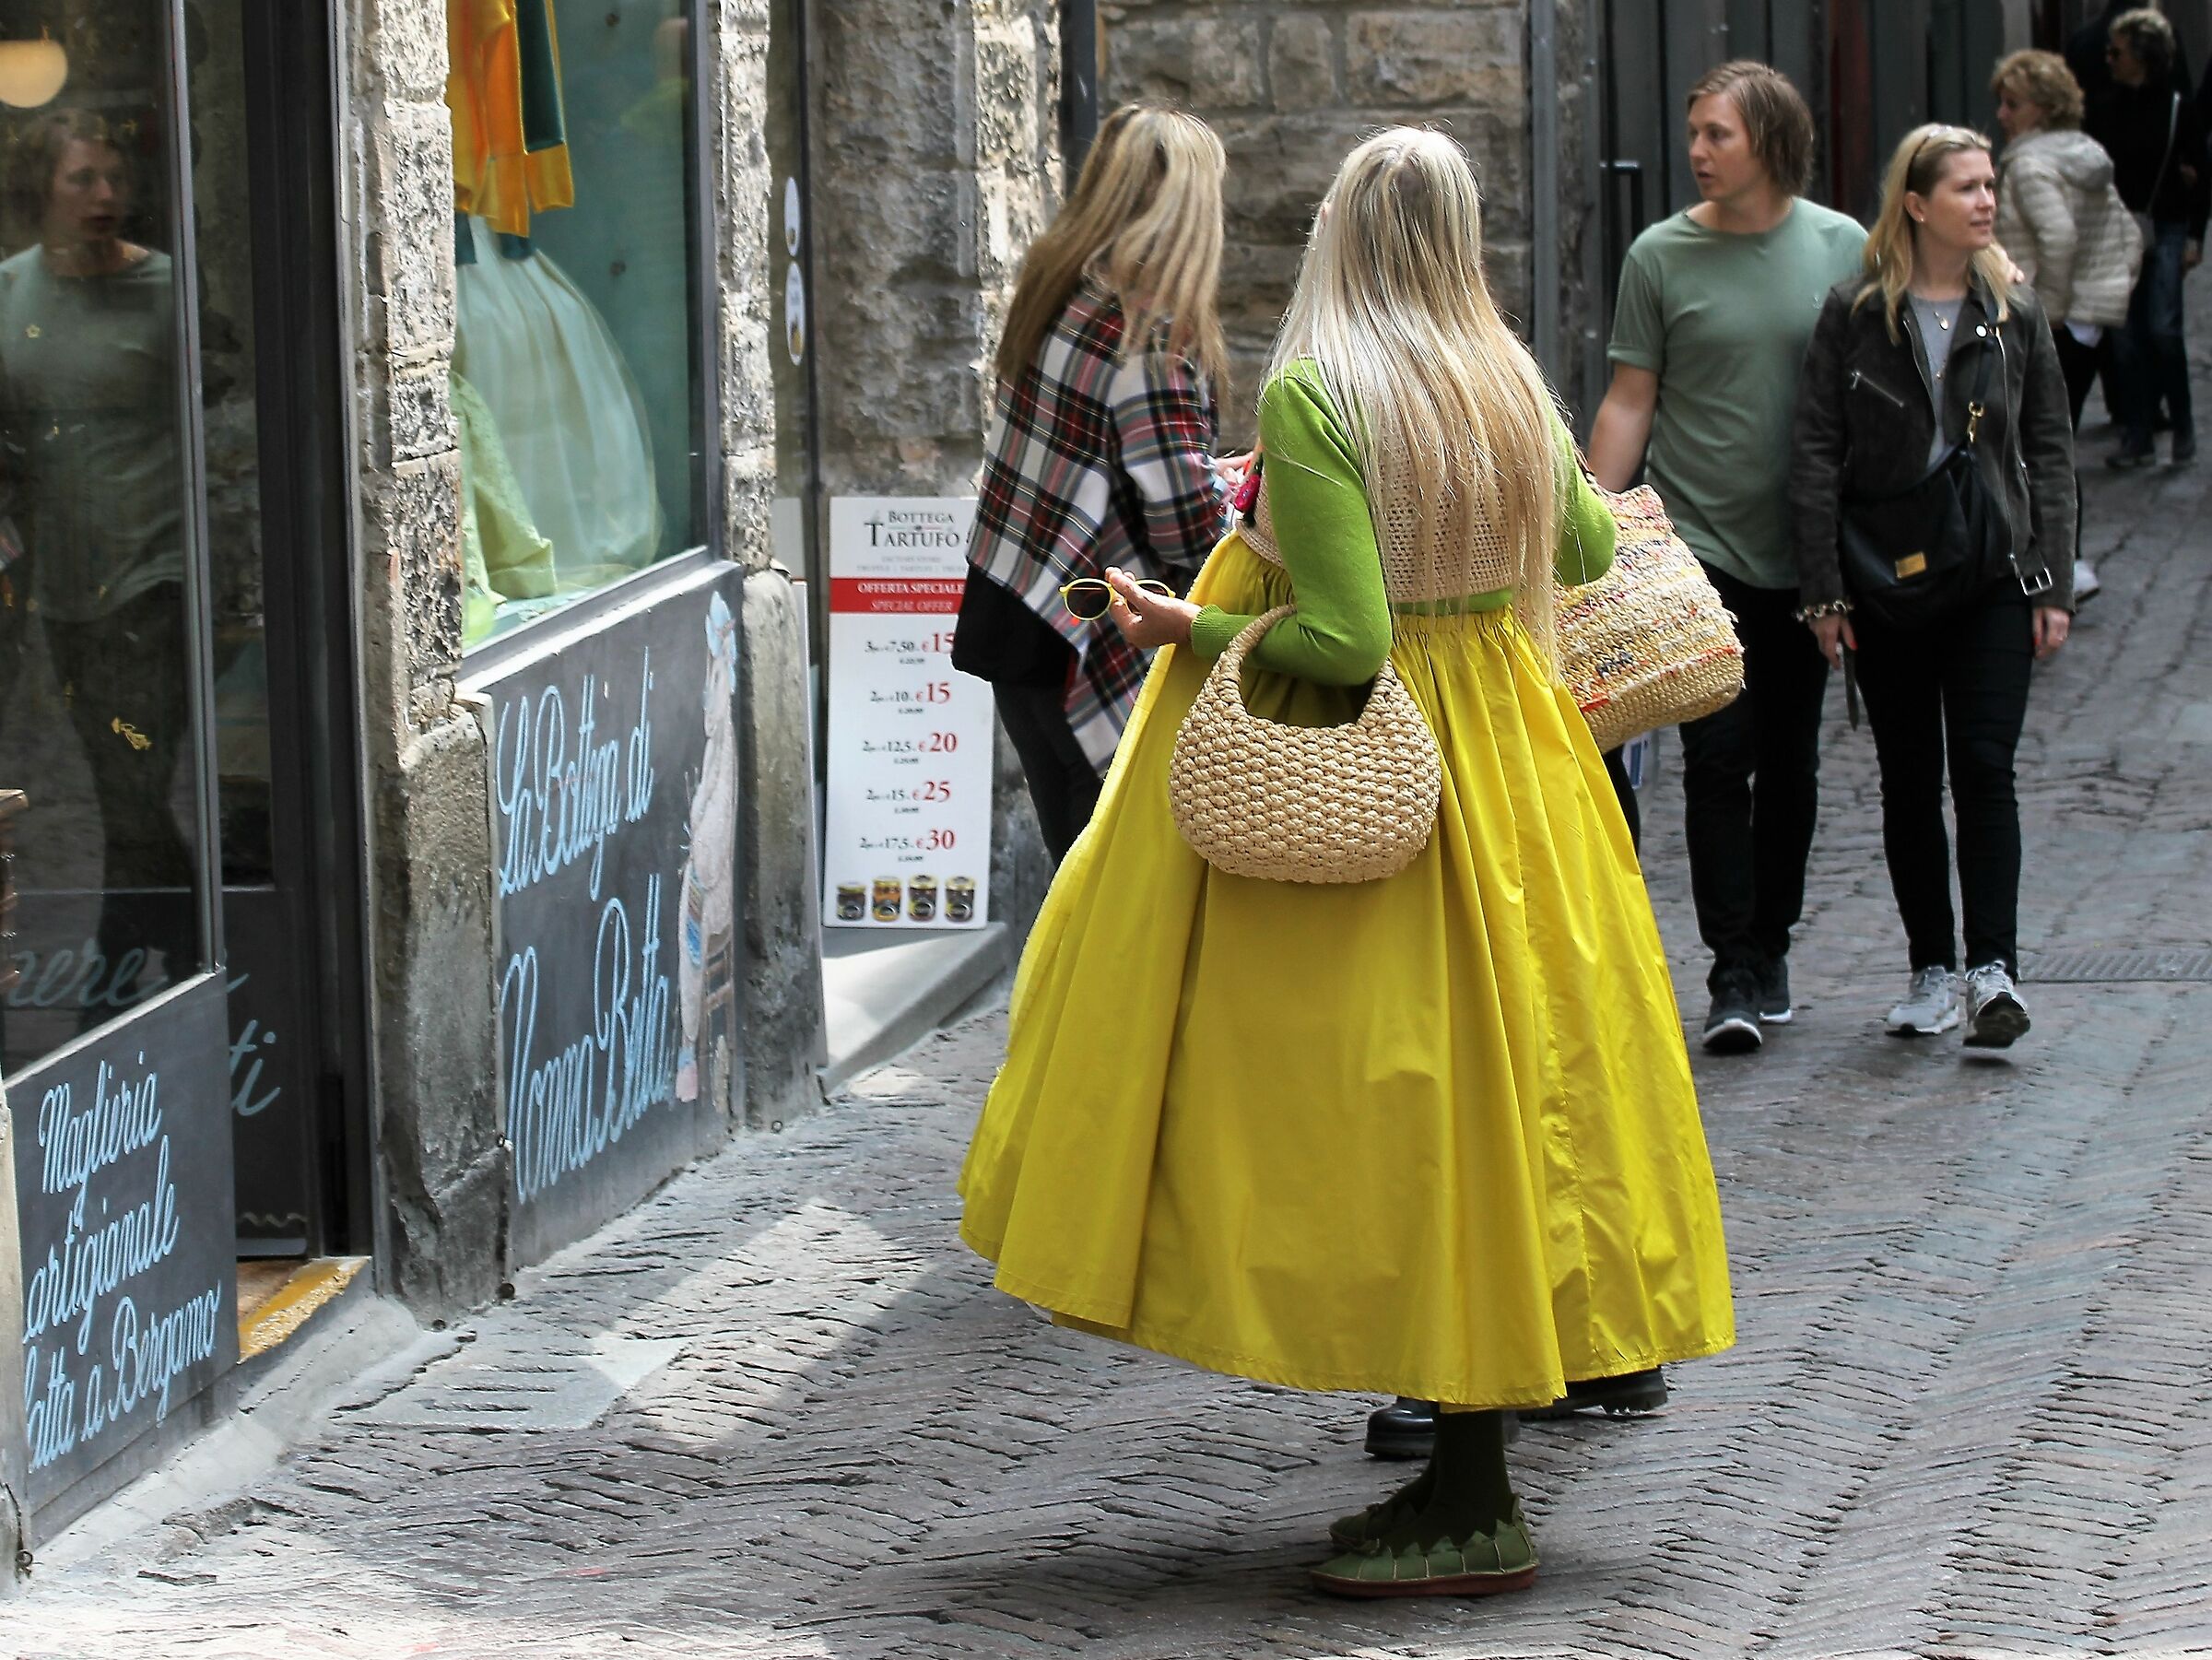 The Lady in Yellow...